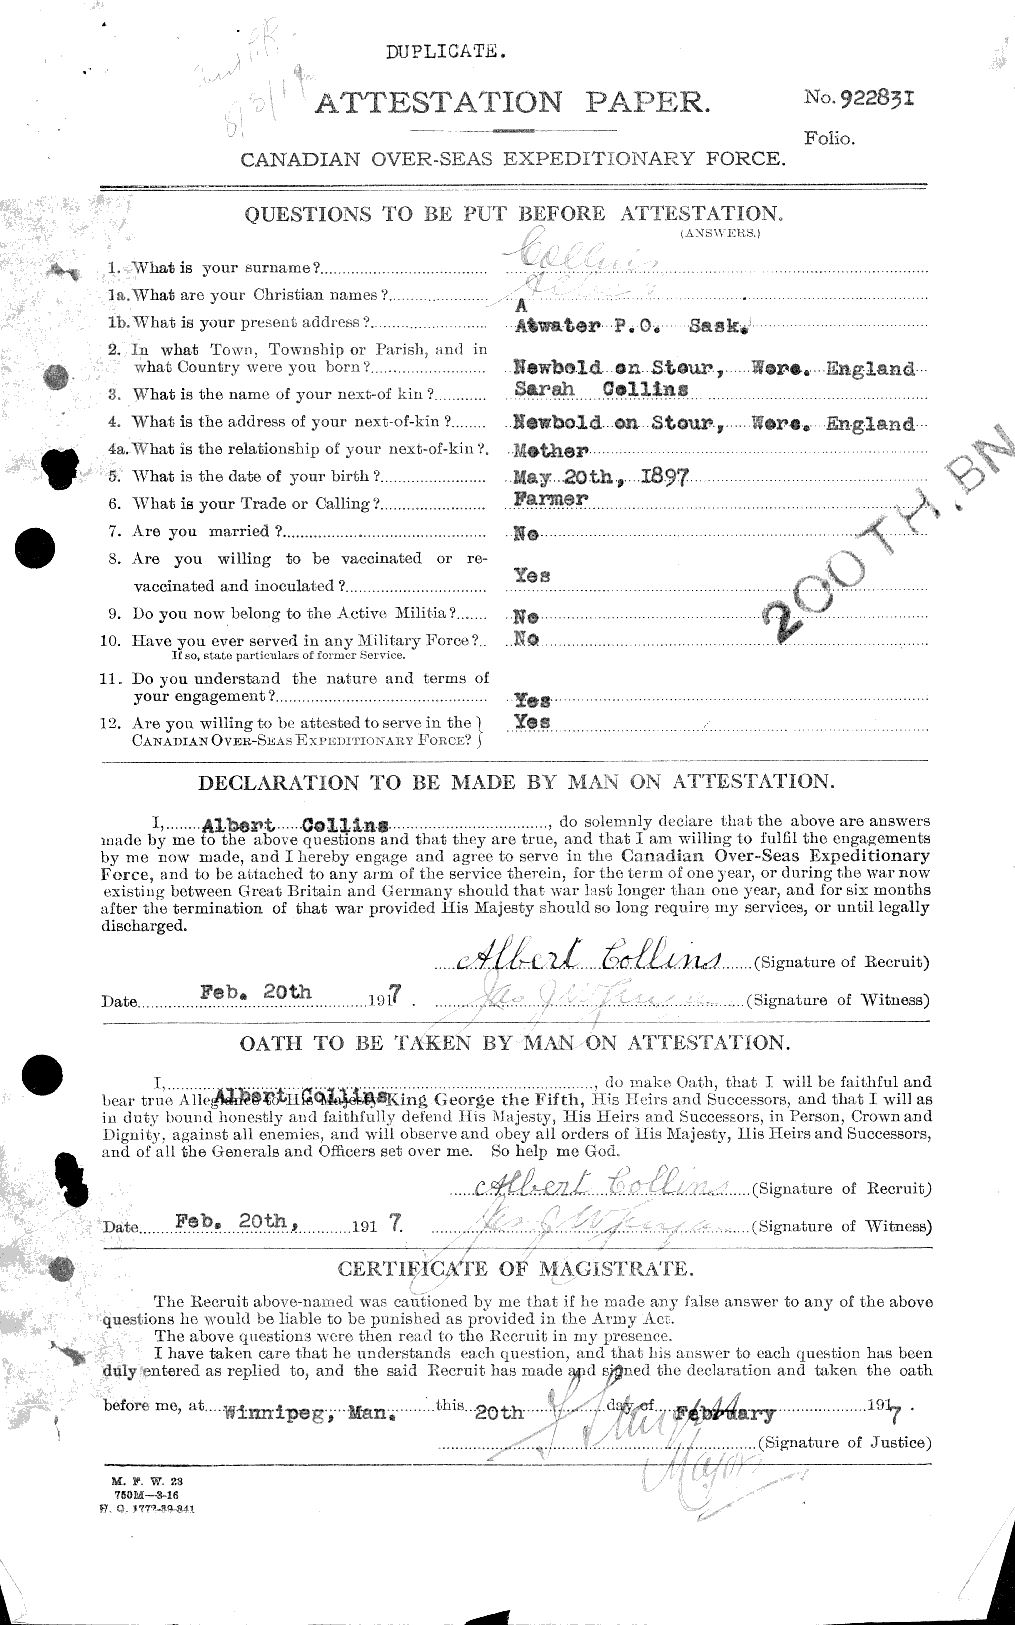 Personnel Records of the First World War - CEF 028920a